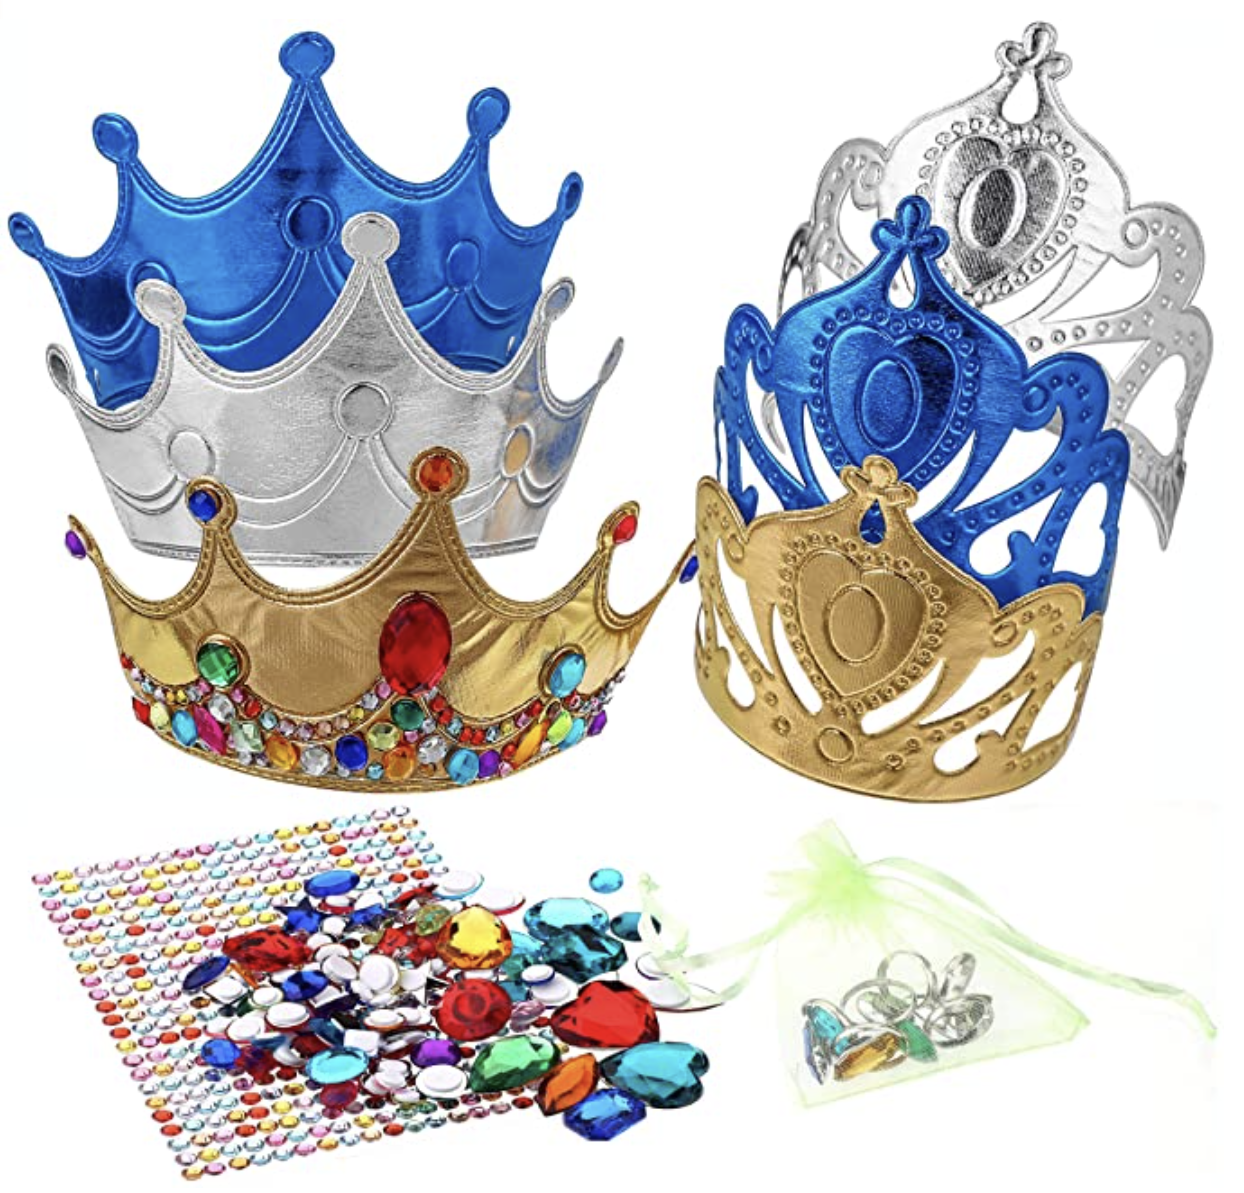 Image of jewels, crowns and Tiara's